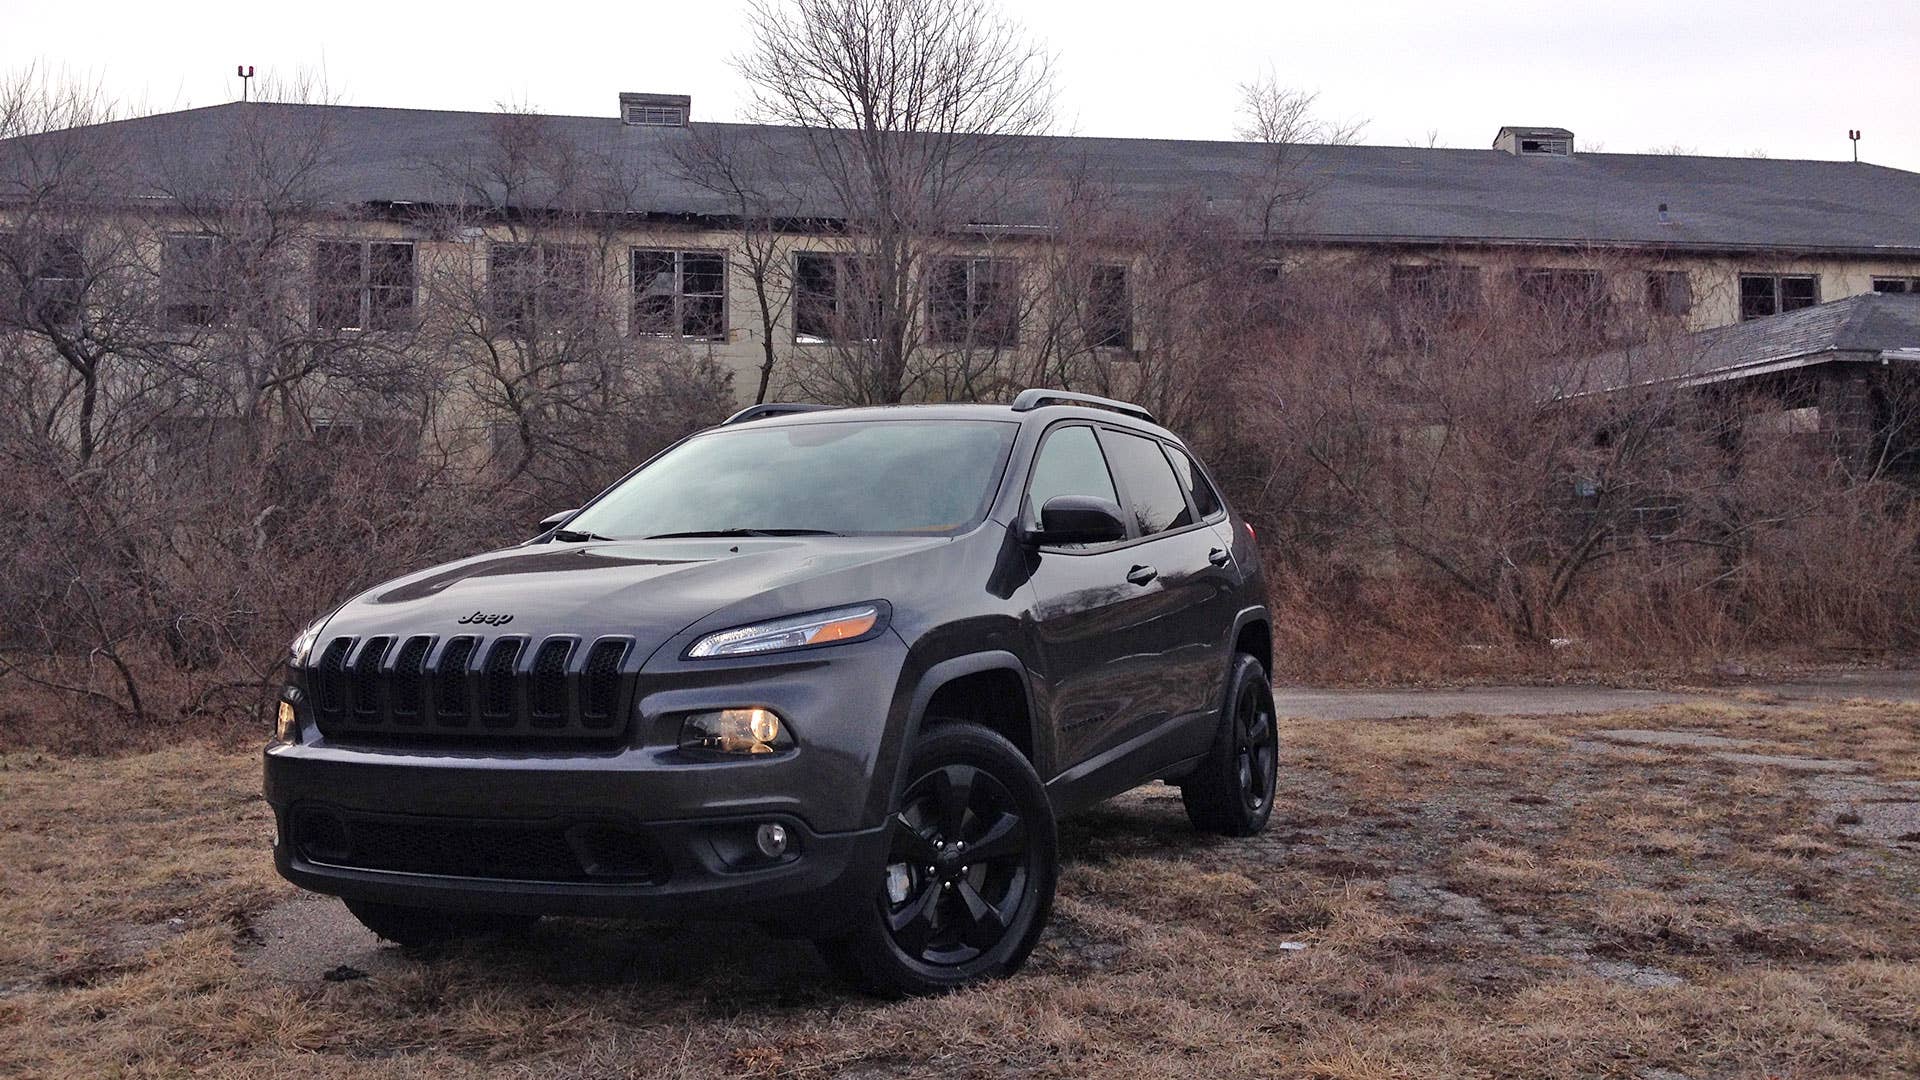 The Jeep Cherokee Latitude 4x4 The People’s SUV The Drive